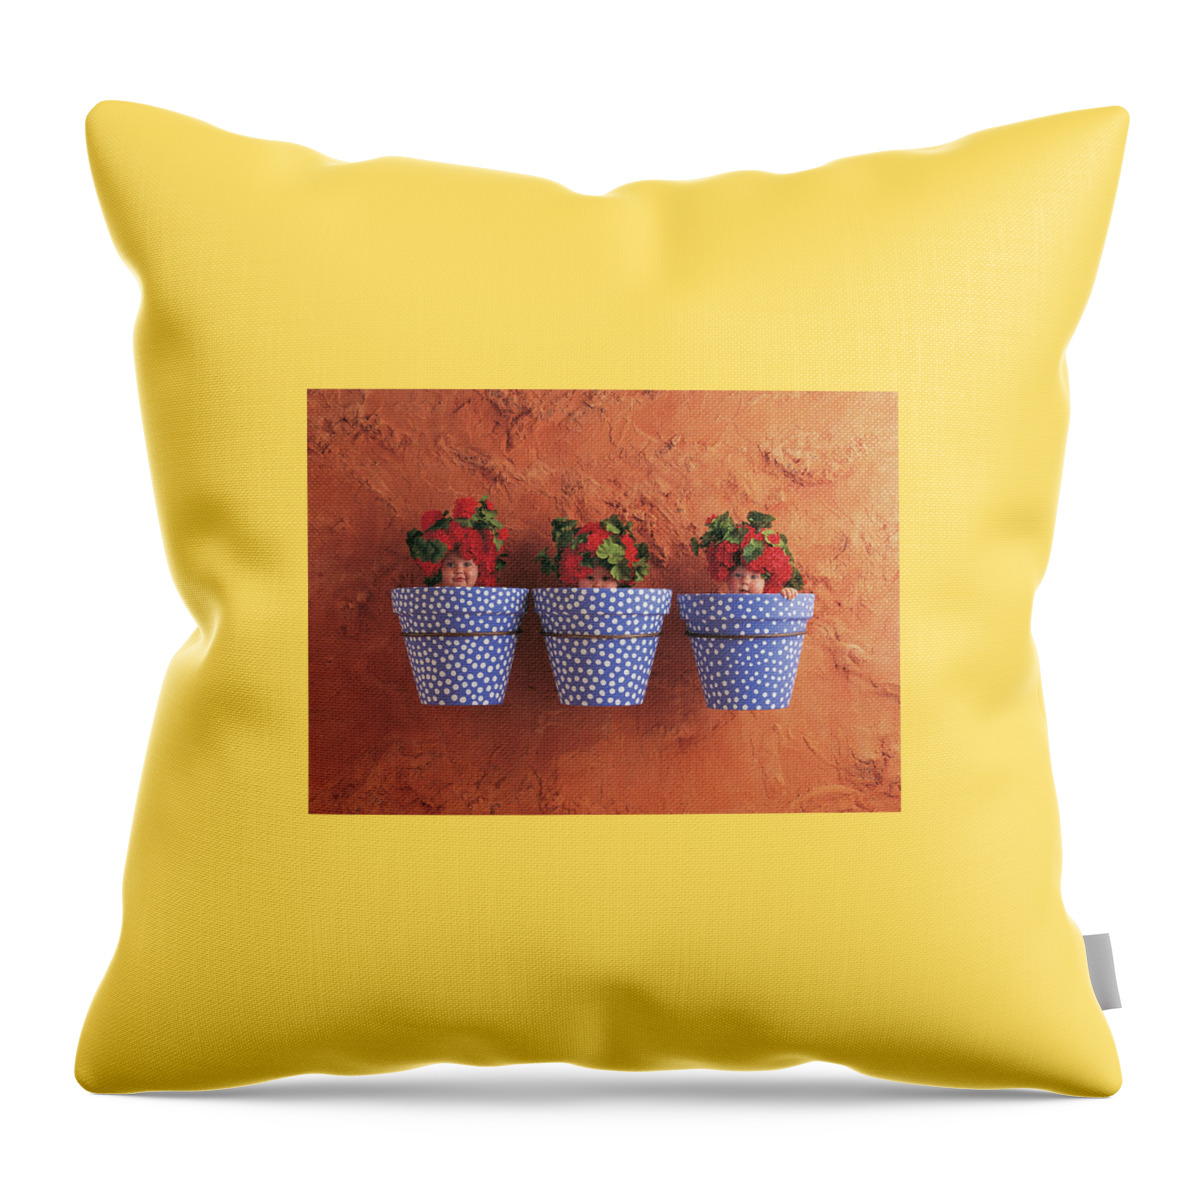 Color Throw Pillow featuring the photograph Mediterranean Pots by Anne Geddes